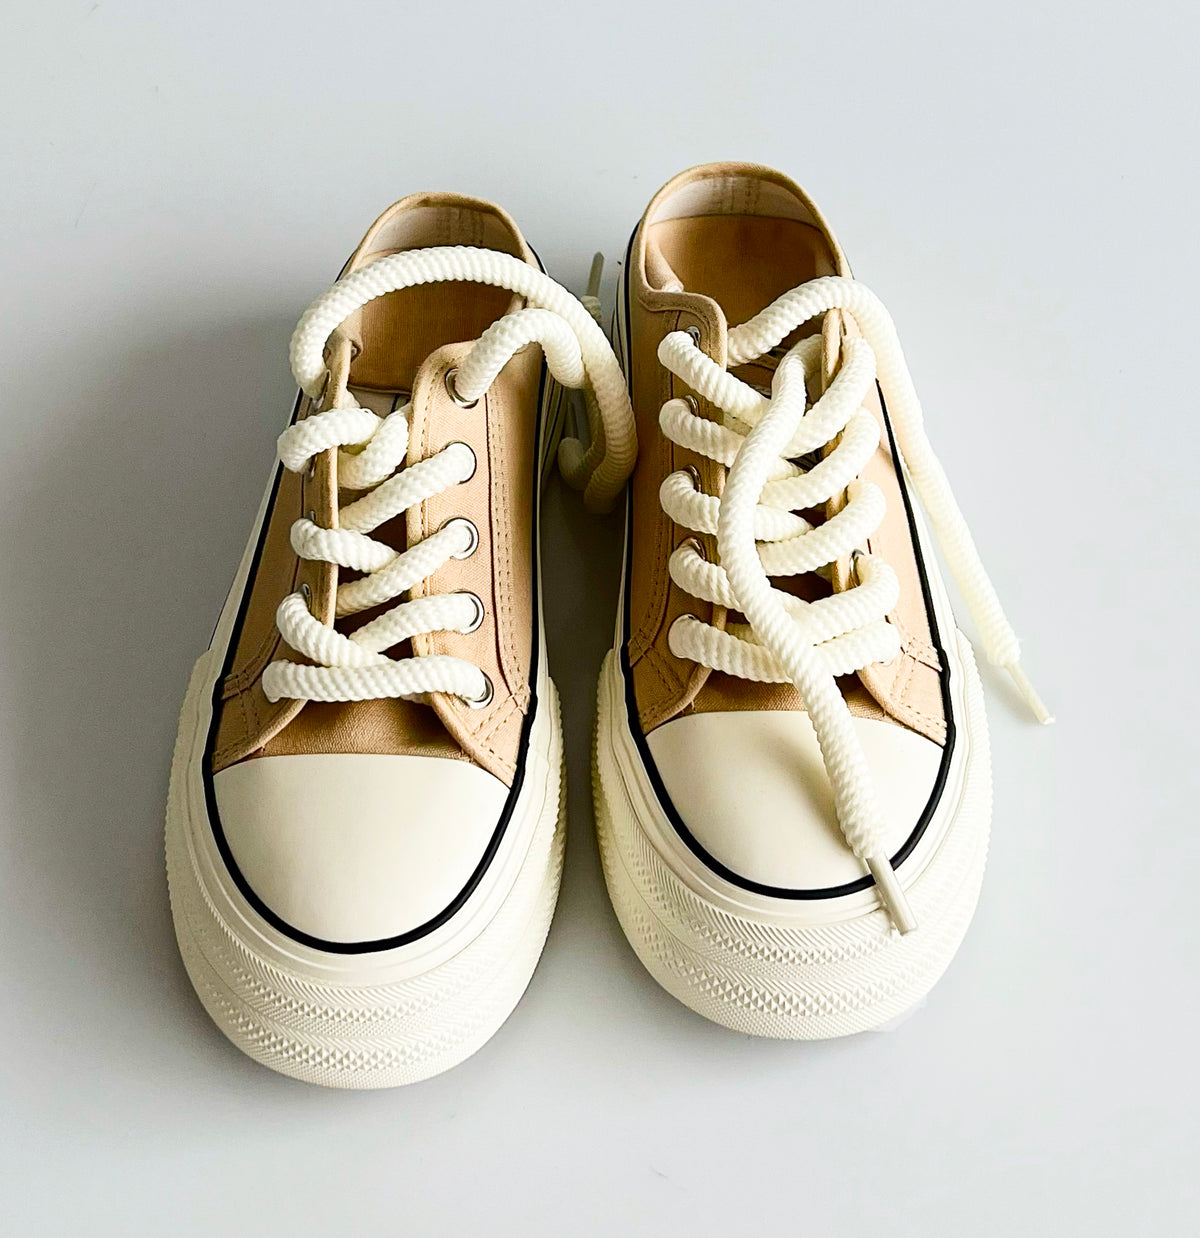 Classic Platform Sneakers - Beige-250 Shoes-Chasing Bandits-Coastal Bloom Boutique, find the trendiest versions of the popular styles and looks Located in Indialantic, FL